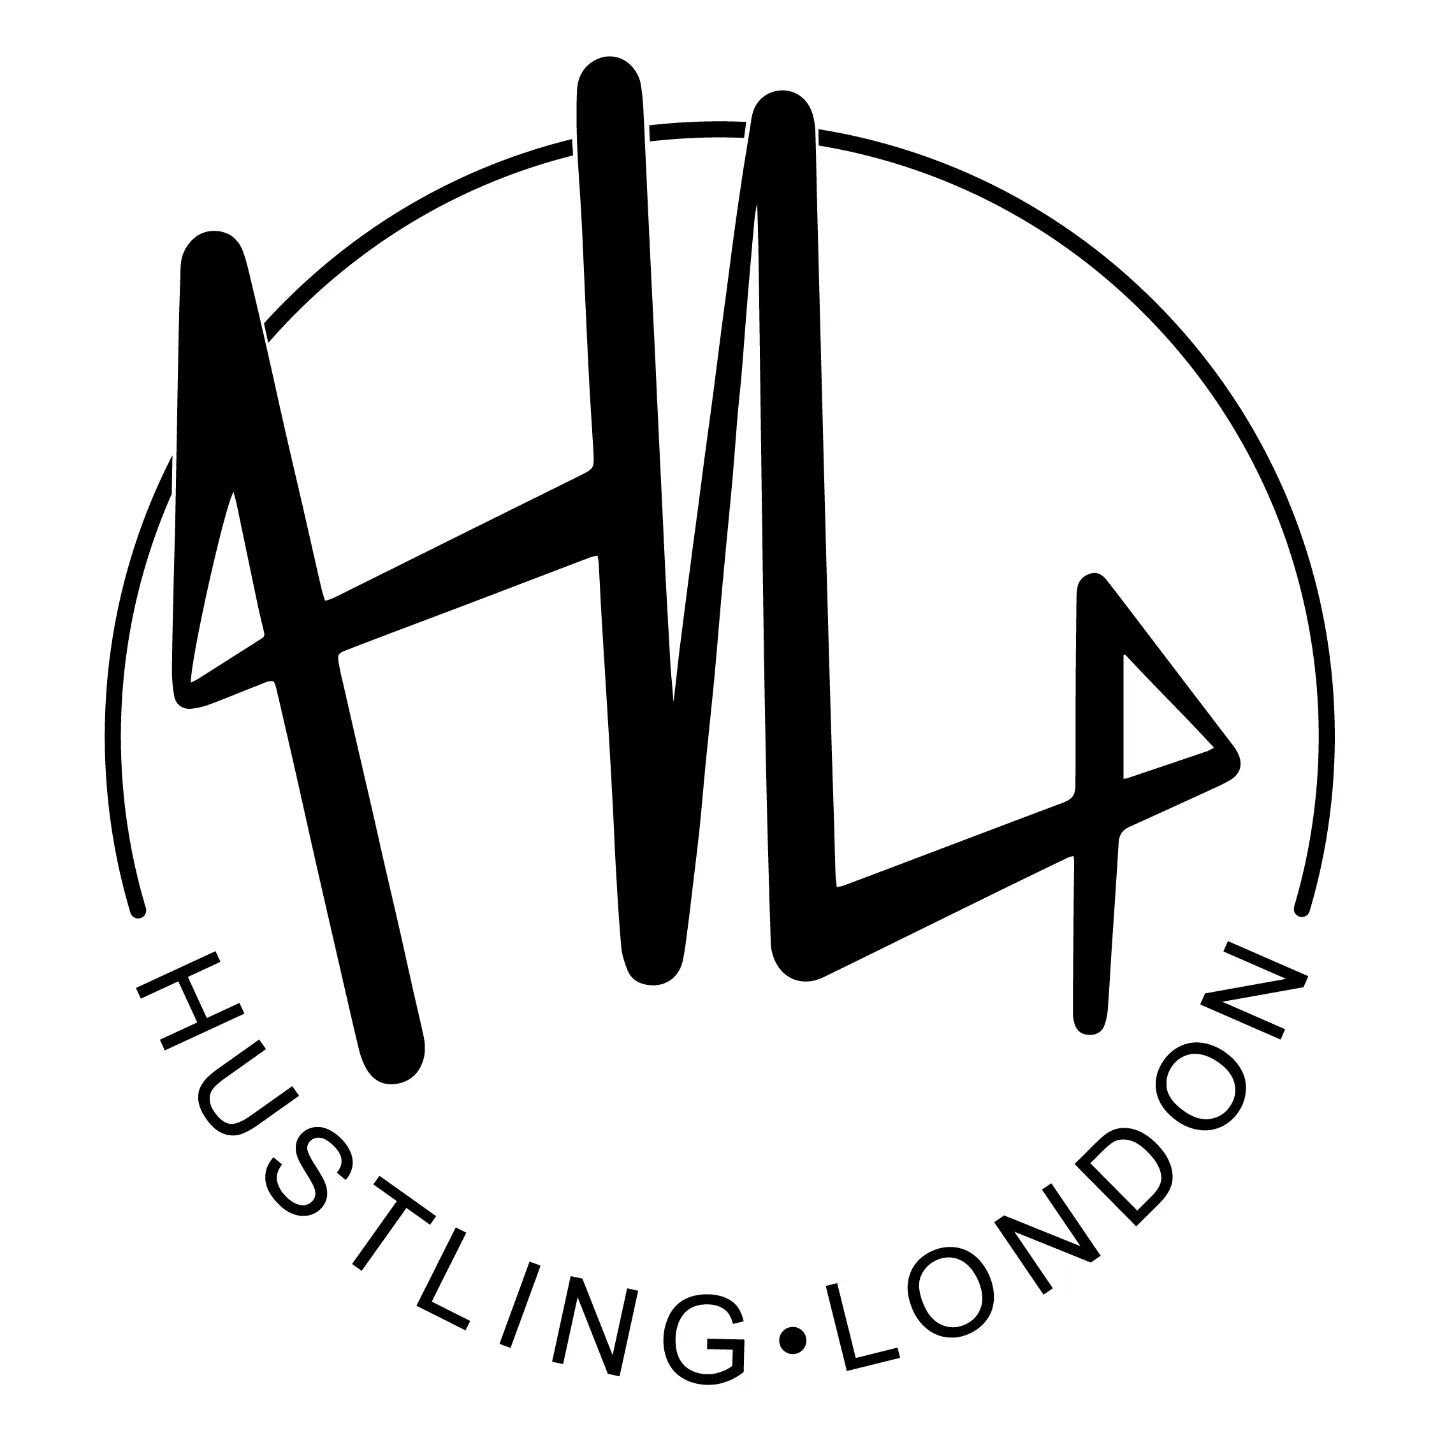 After all these years, we finally have a logo! 😁 Thank you to our student and designer @gif_babe and project leader @yeetingliu ✨️ Look out for @hustlinglondon merch in 2023!